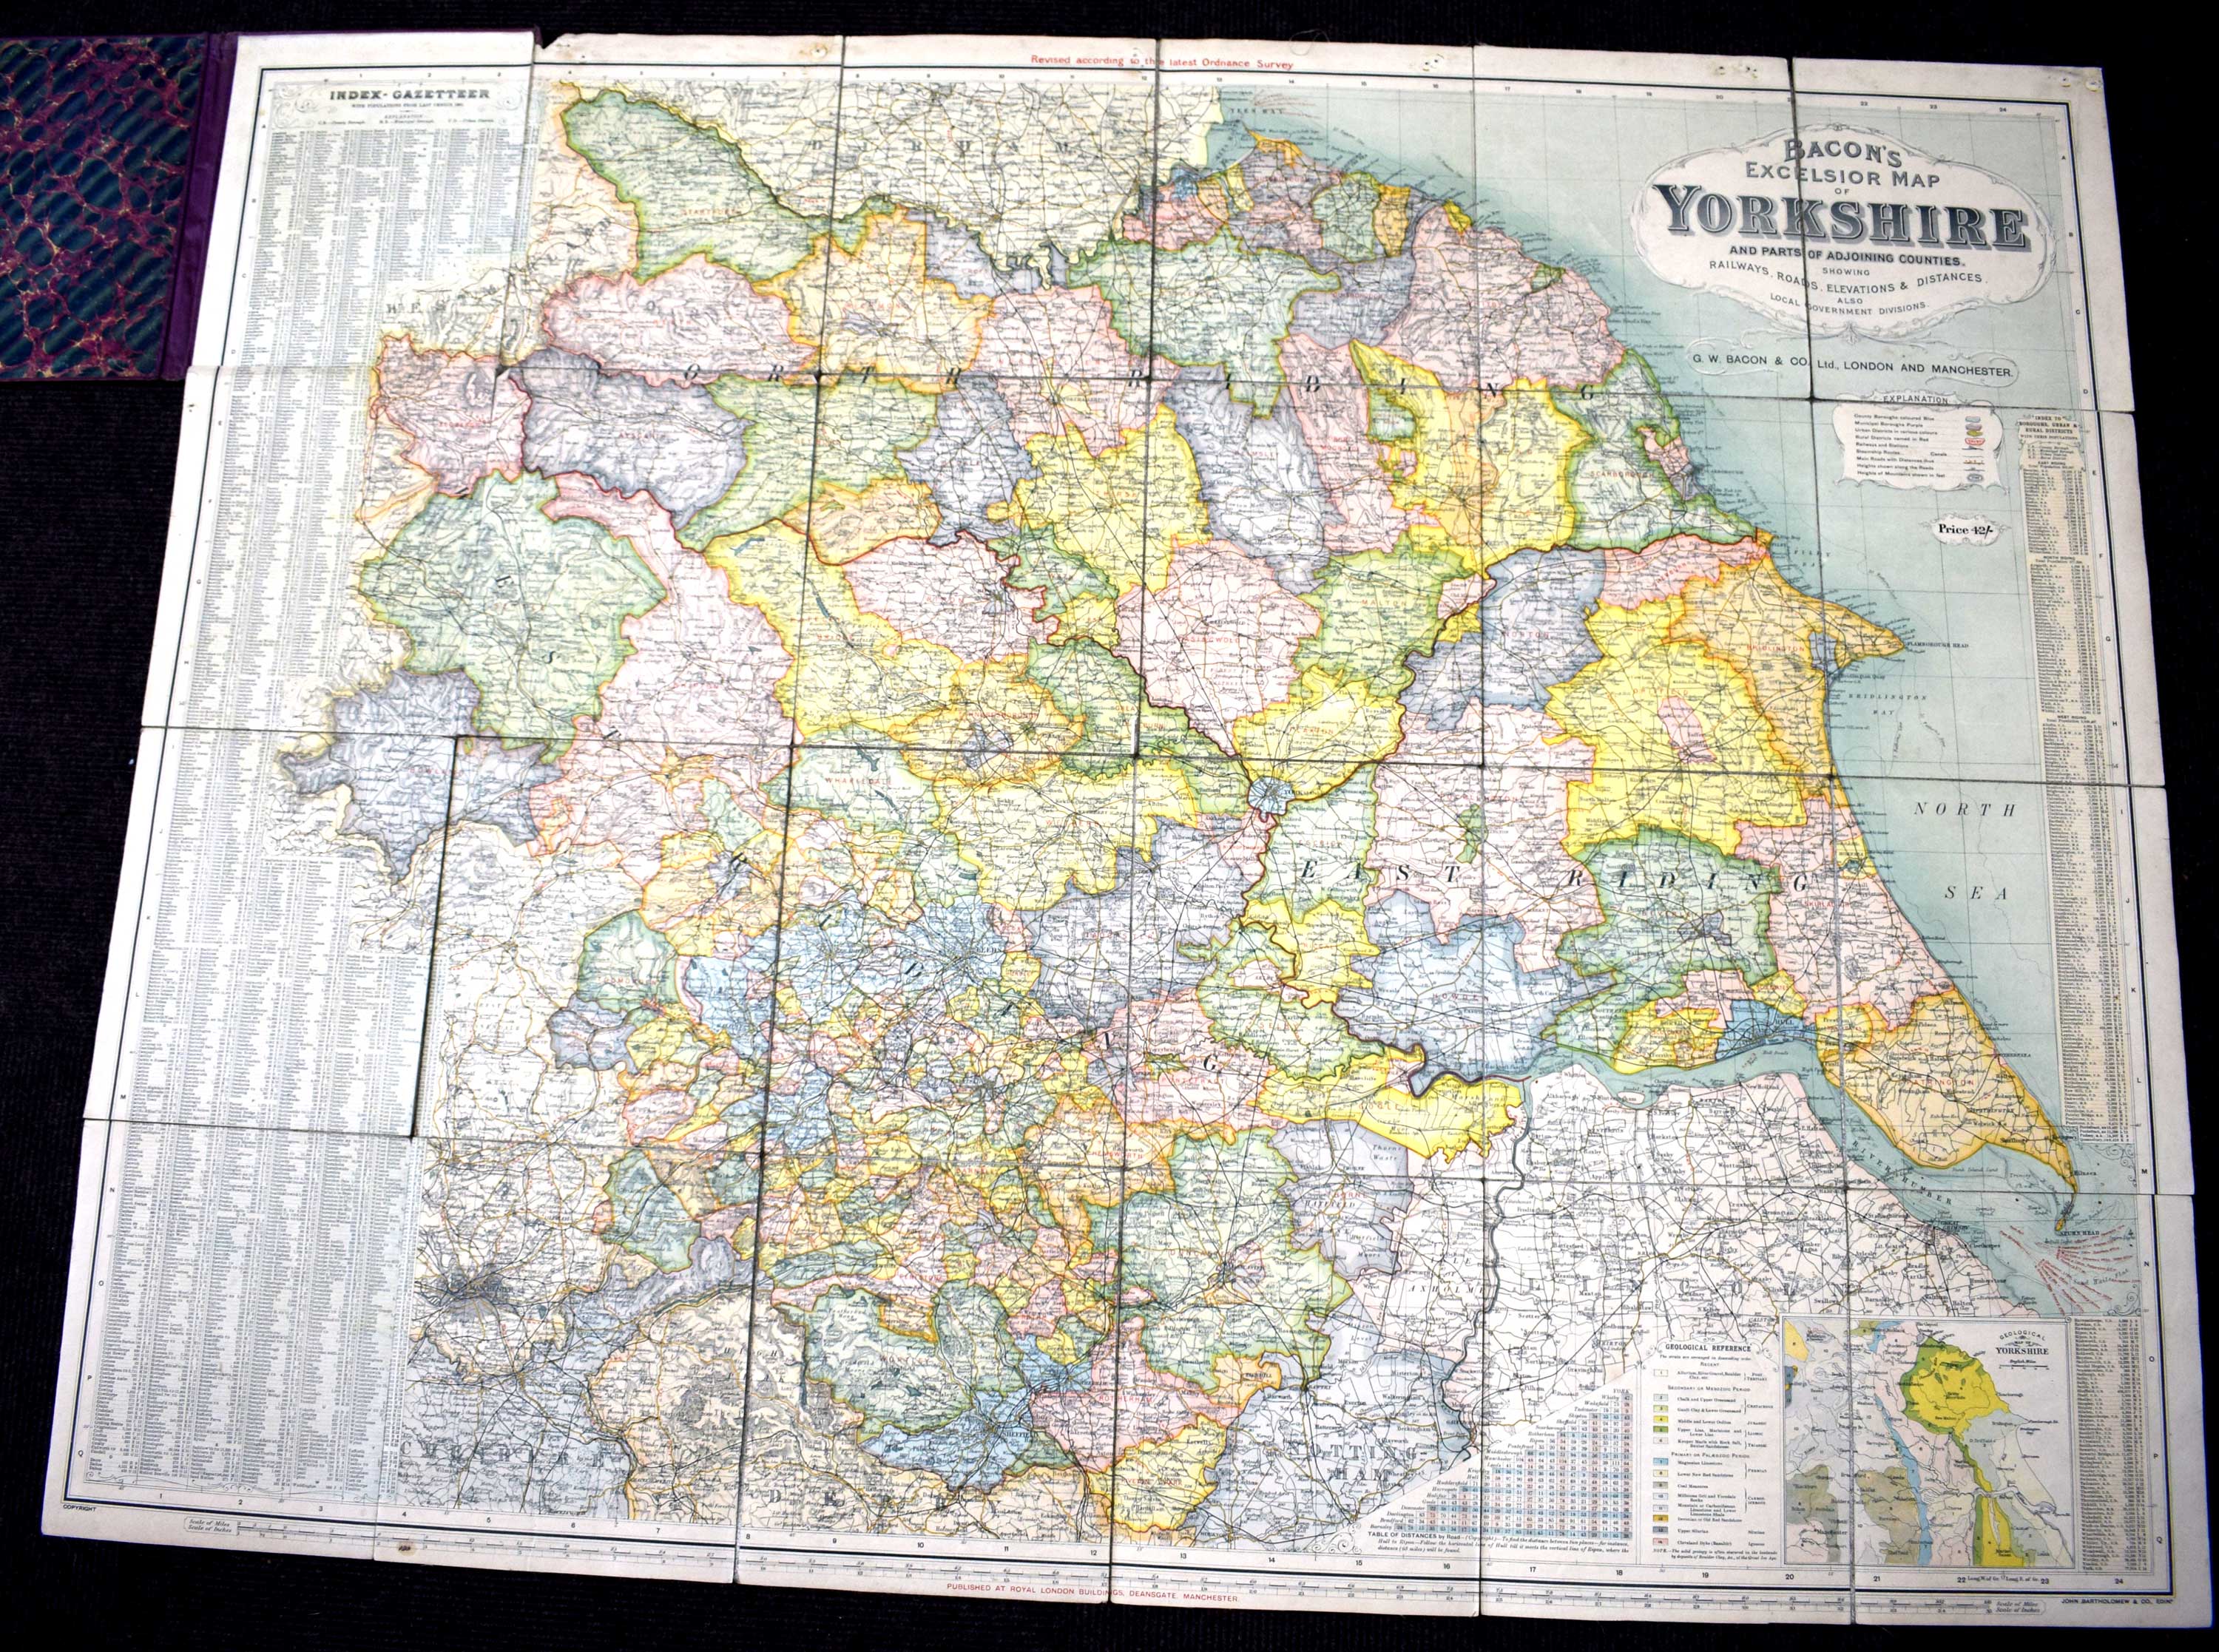 Bacon's Excelsior Map of Yorkshire and Part of Adjoining Counties showing Railways, Roads, Elevations and Distances Also Local Government Divisions